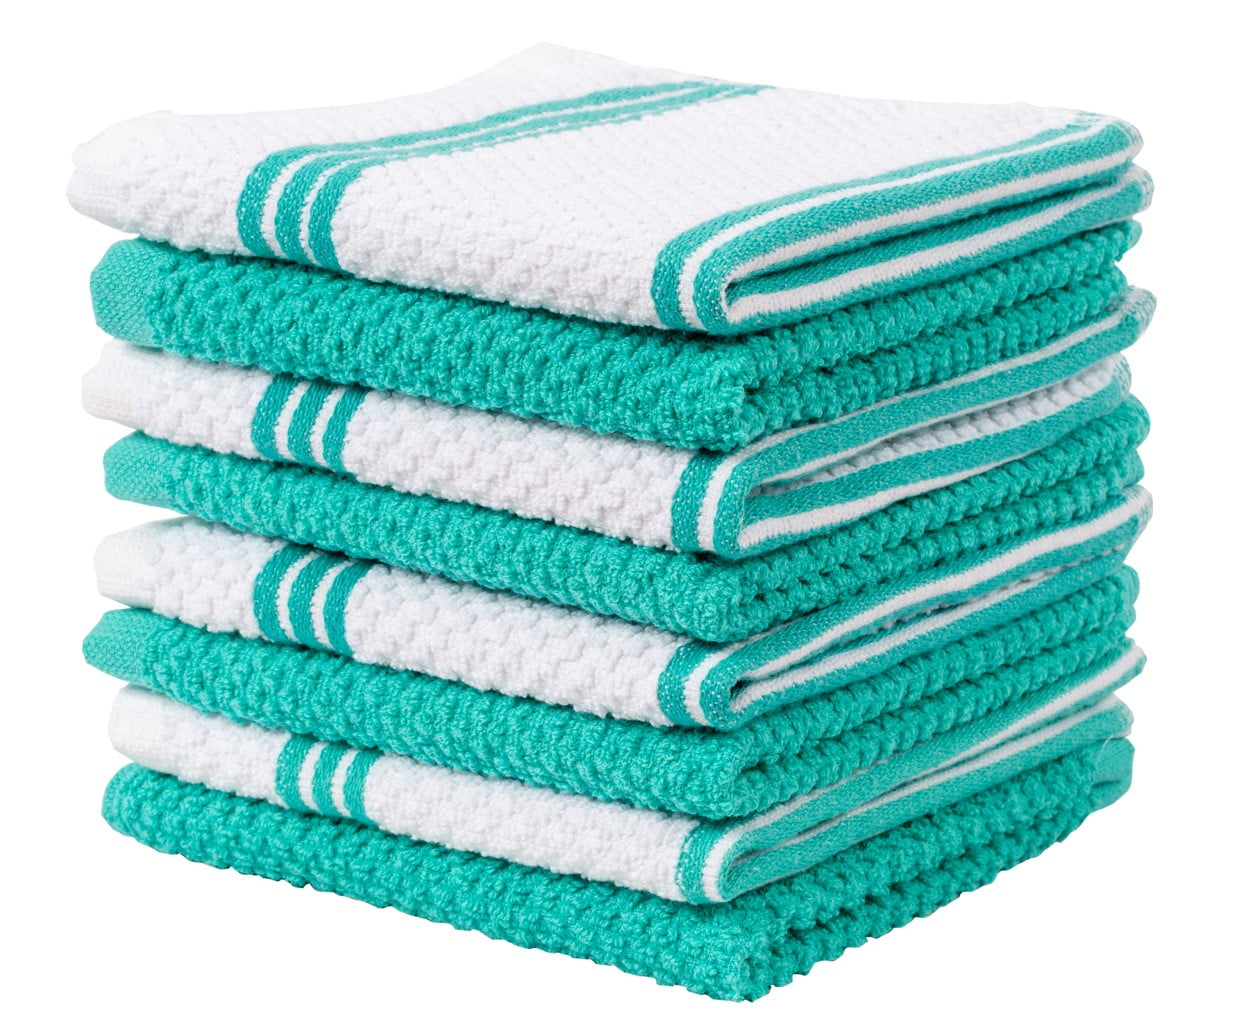 120 terry cloth 100% cotton cleaning towels shop bar rags 12x12 .85# 